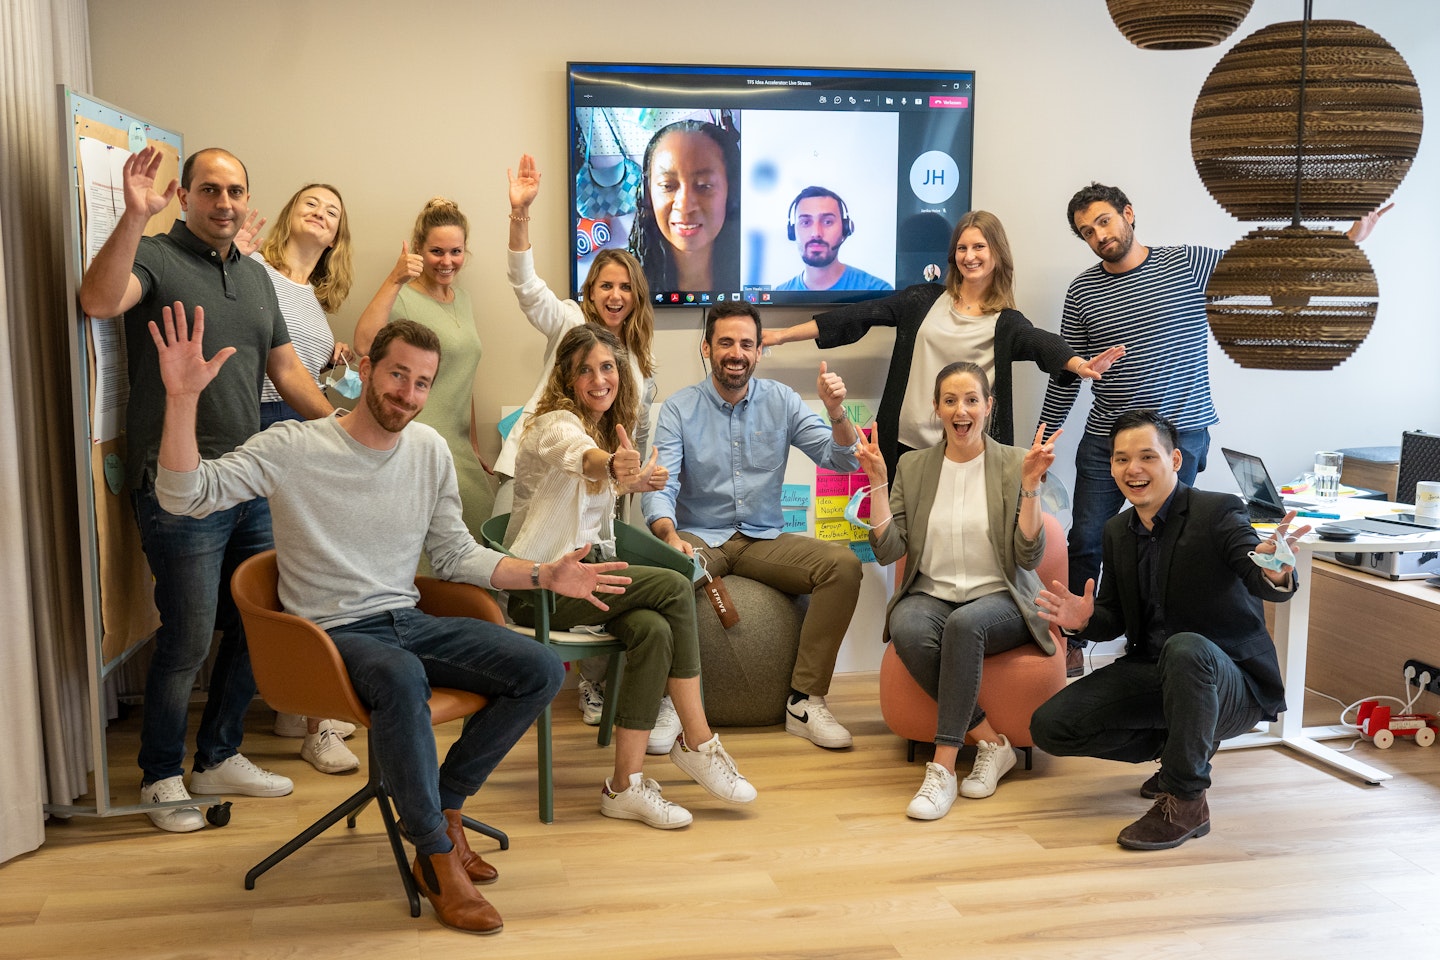 13 member team photo, 11 people in Tangity Munich Studio, 3 connected via Teams on television